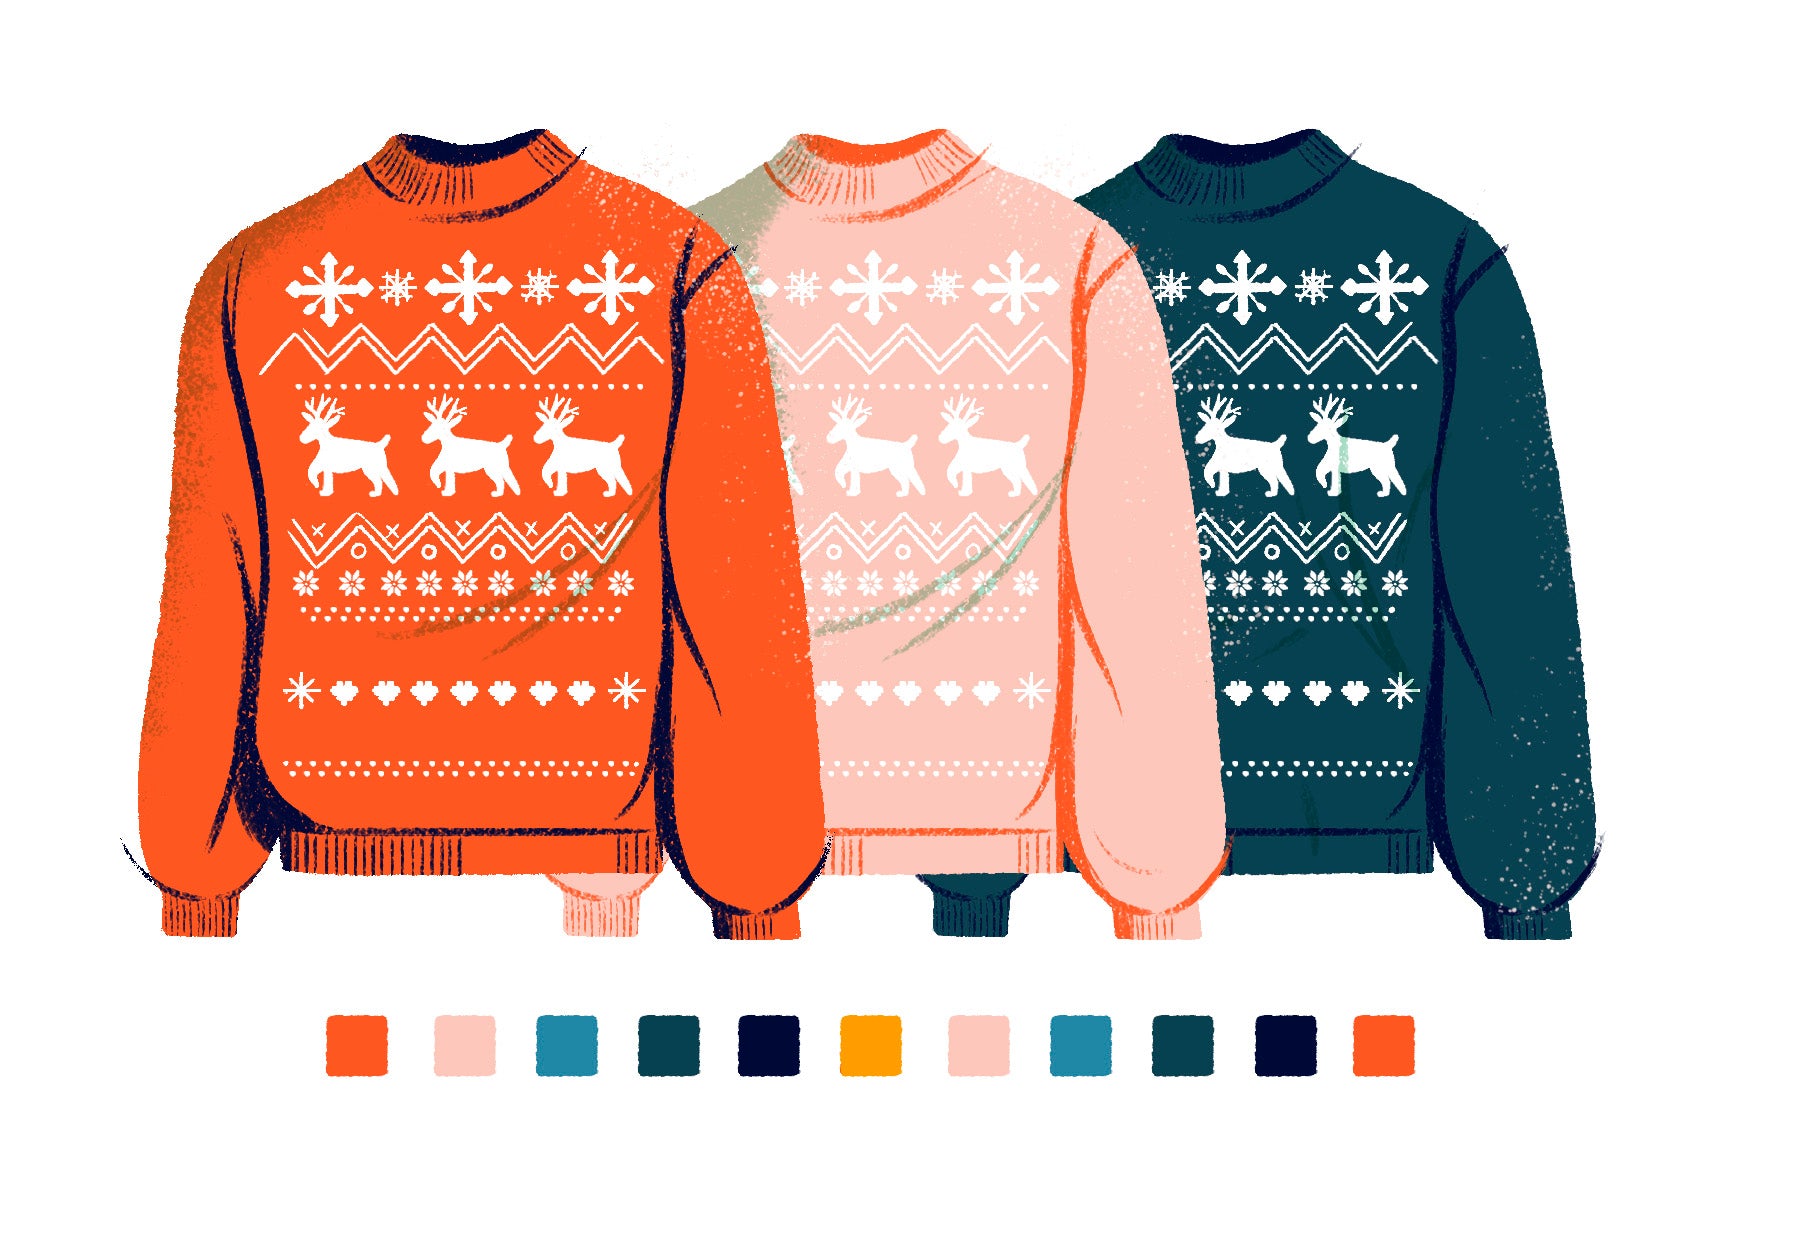 Illustration of three ugly Christmas sweatshirts in red, pink, and dark blue and all featuring a unicorn design. A row of colour swatches sits below the sweatshirts.